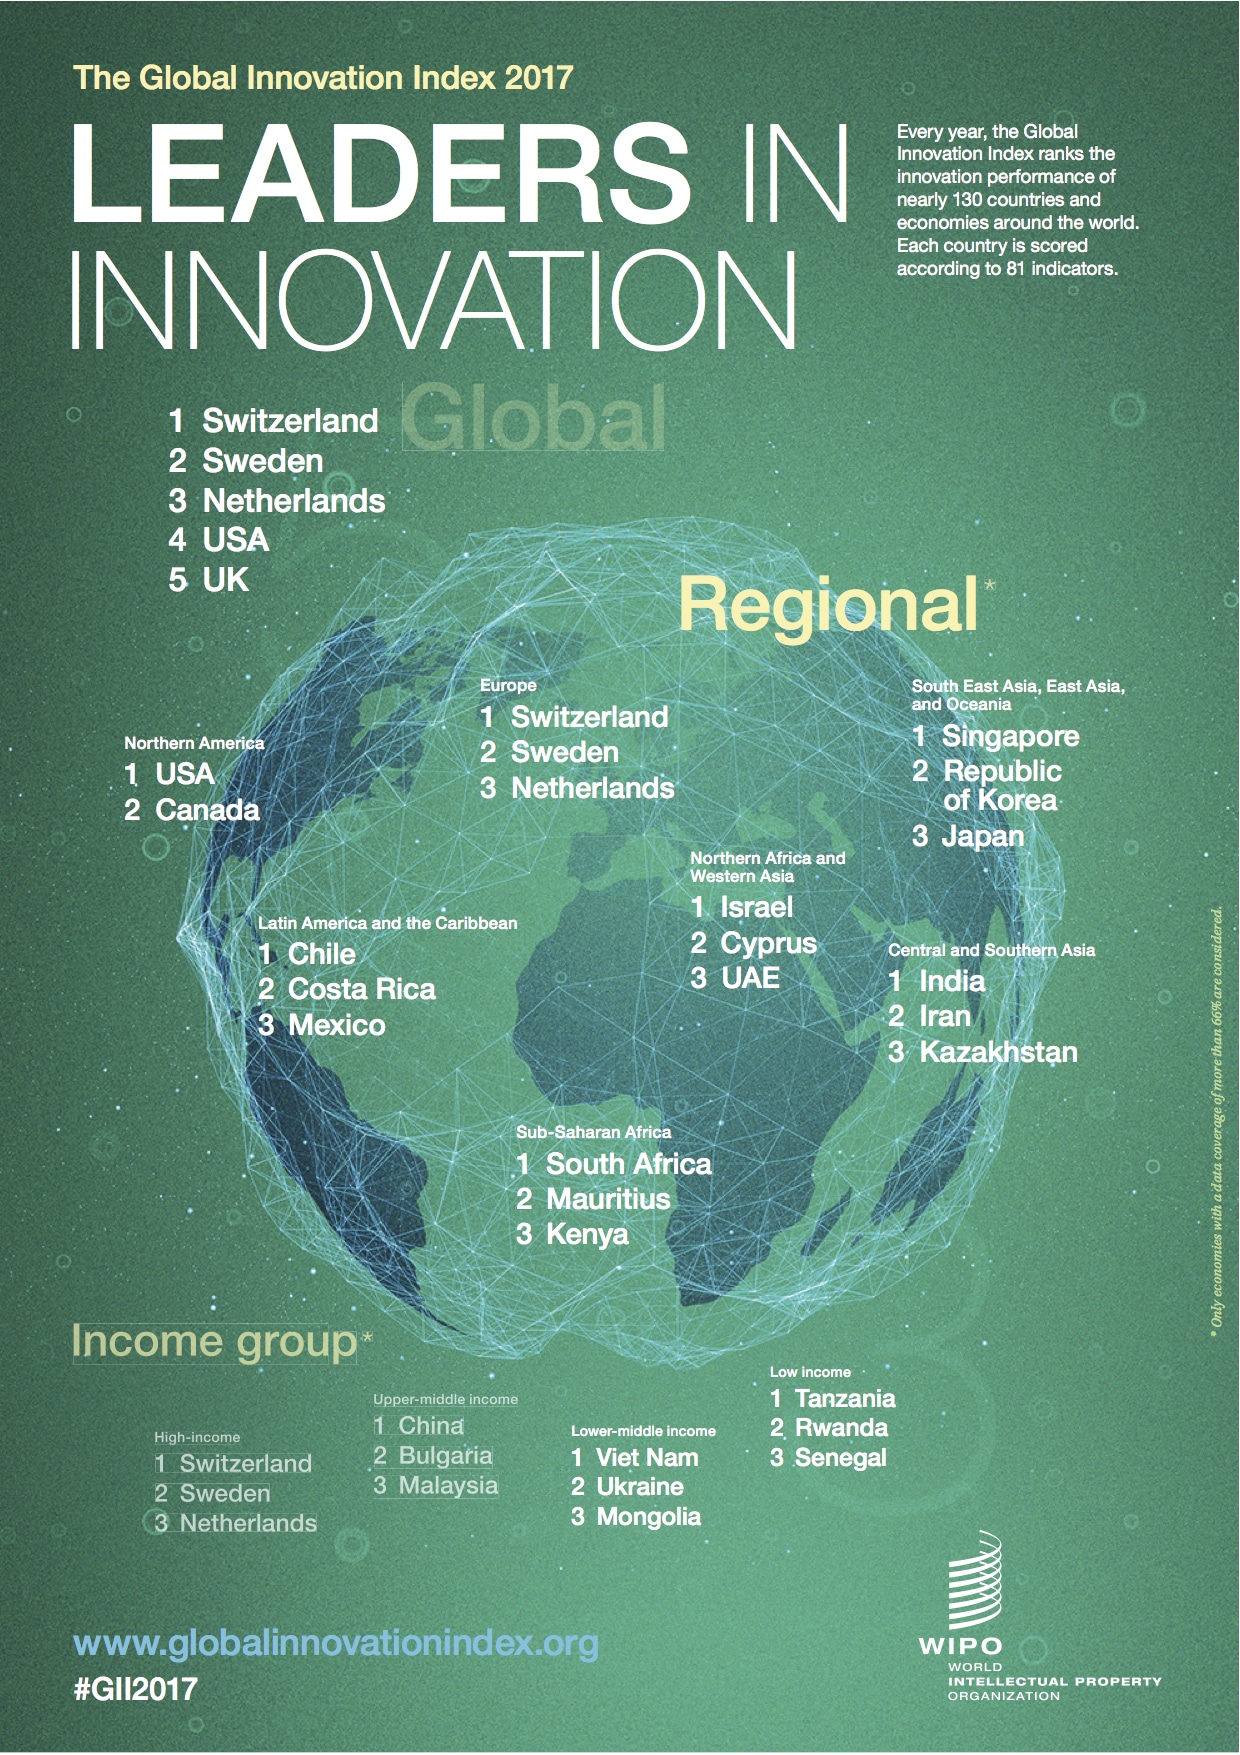 Sweden is a global innovation leader - and that’s official!